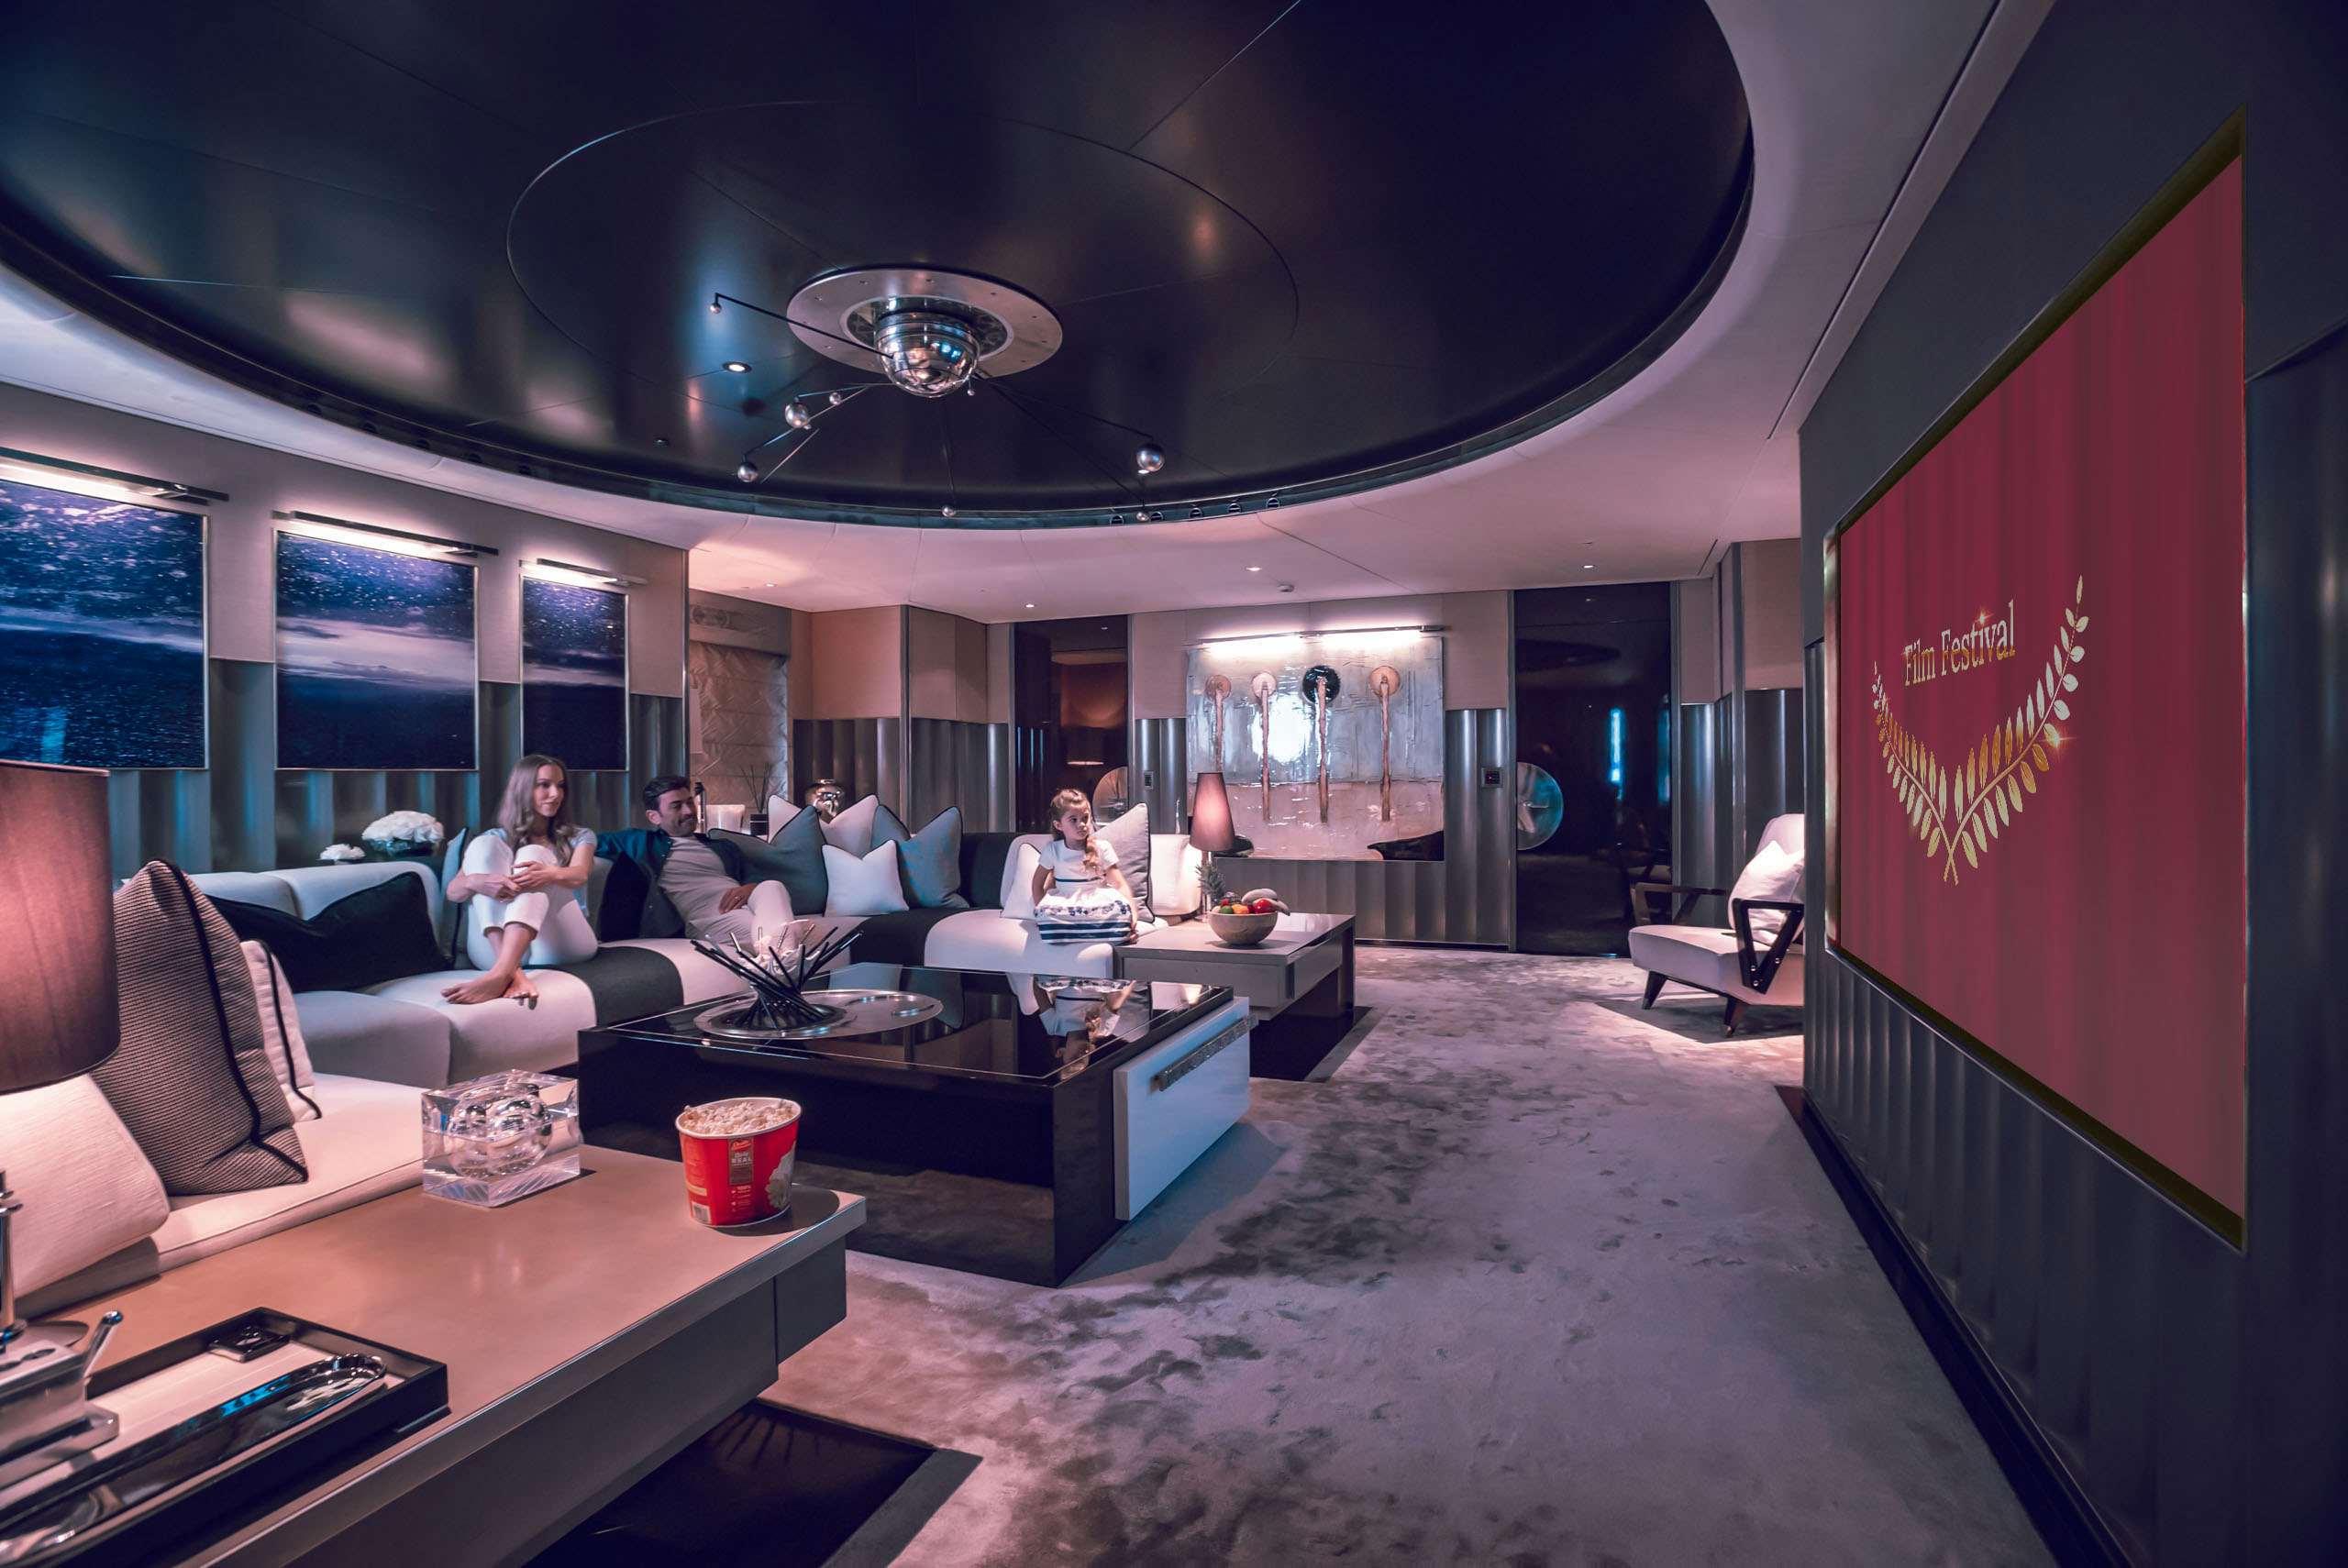 Family enjoying a movie on board superyacht during the Cannes Film Festival